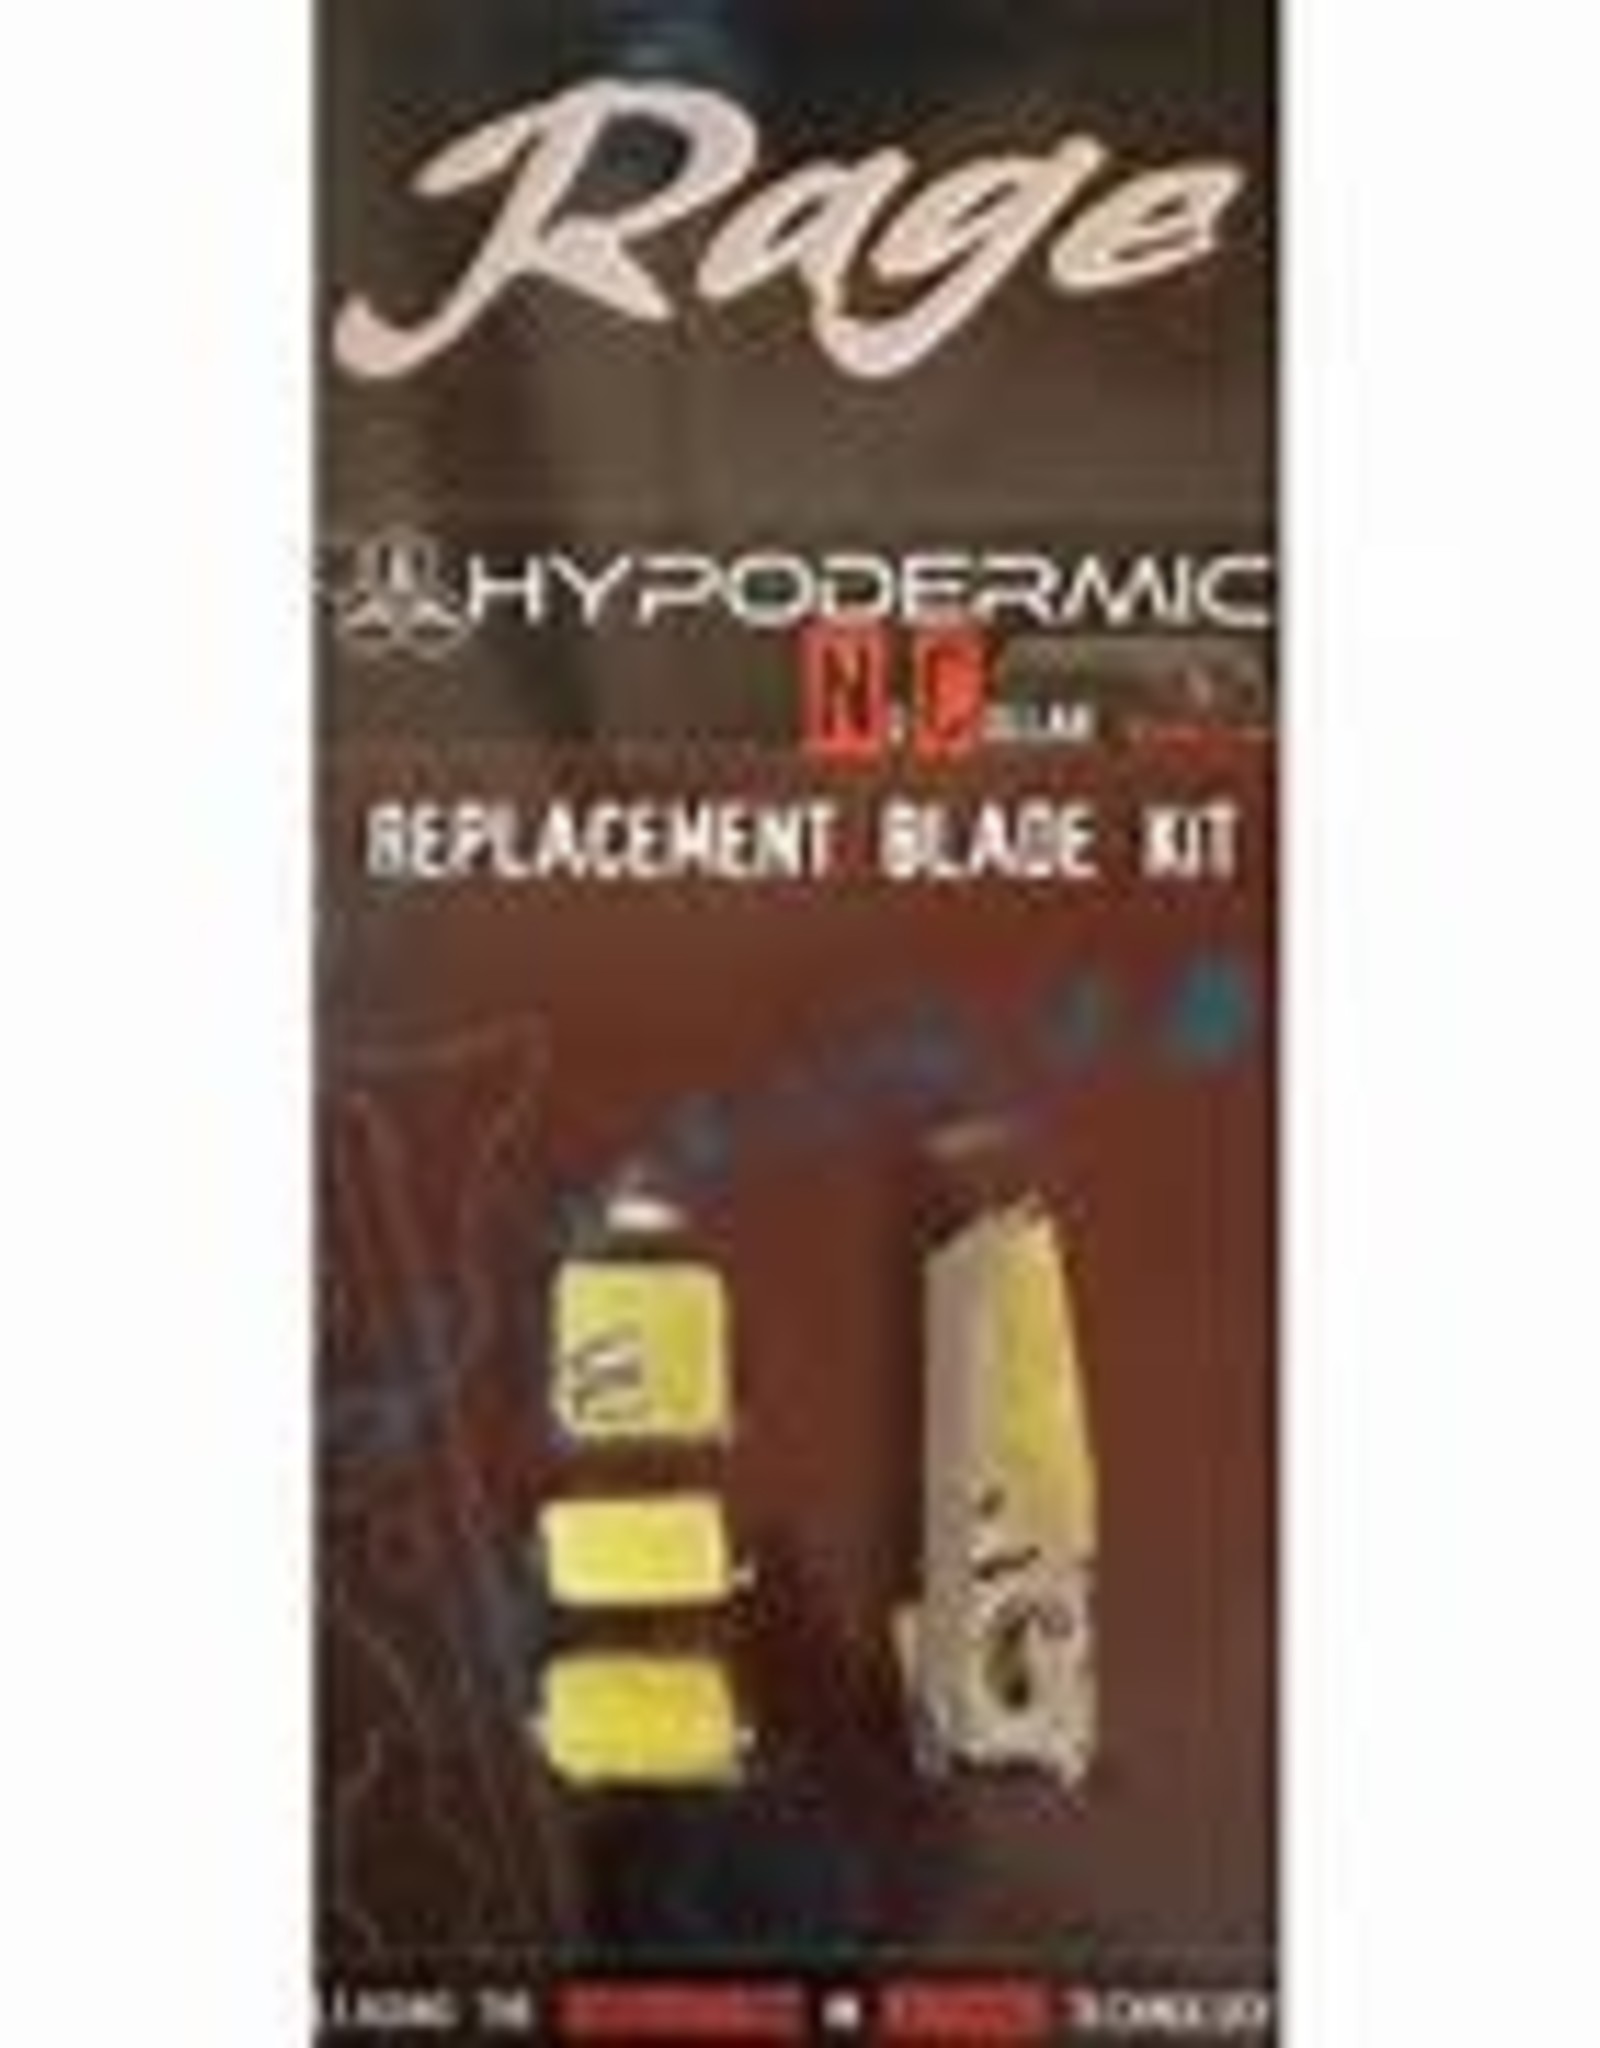 Rage Hypodermic No Collar Replacement Blade Kit